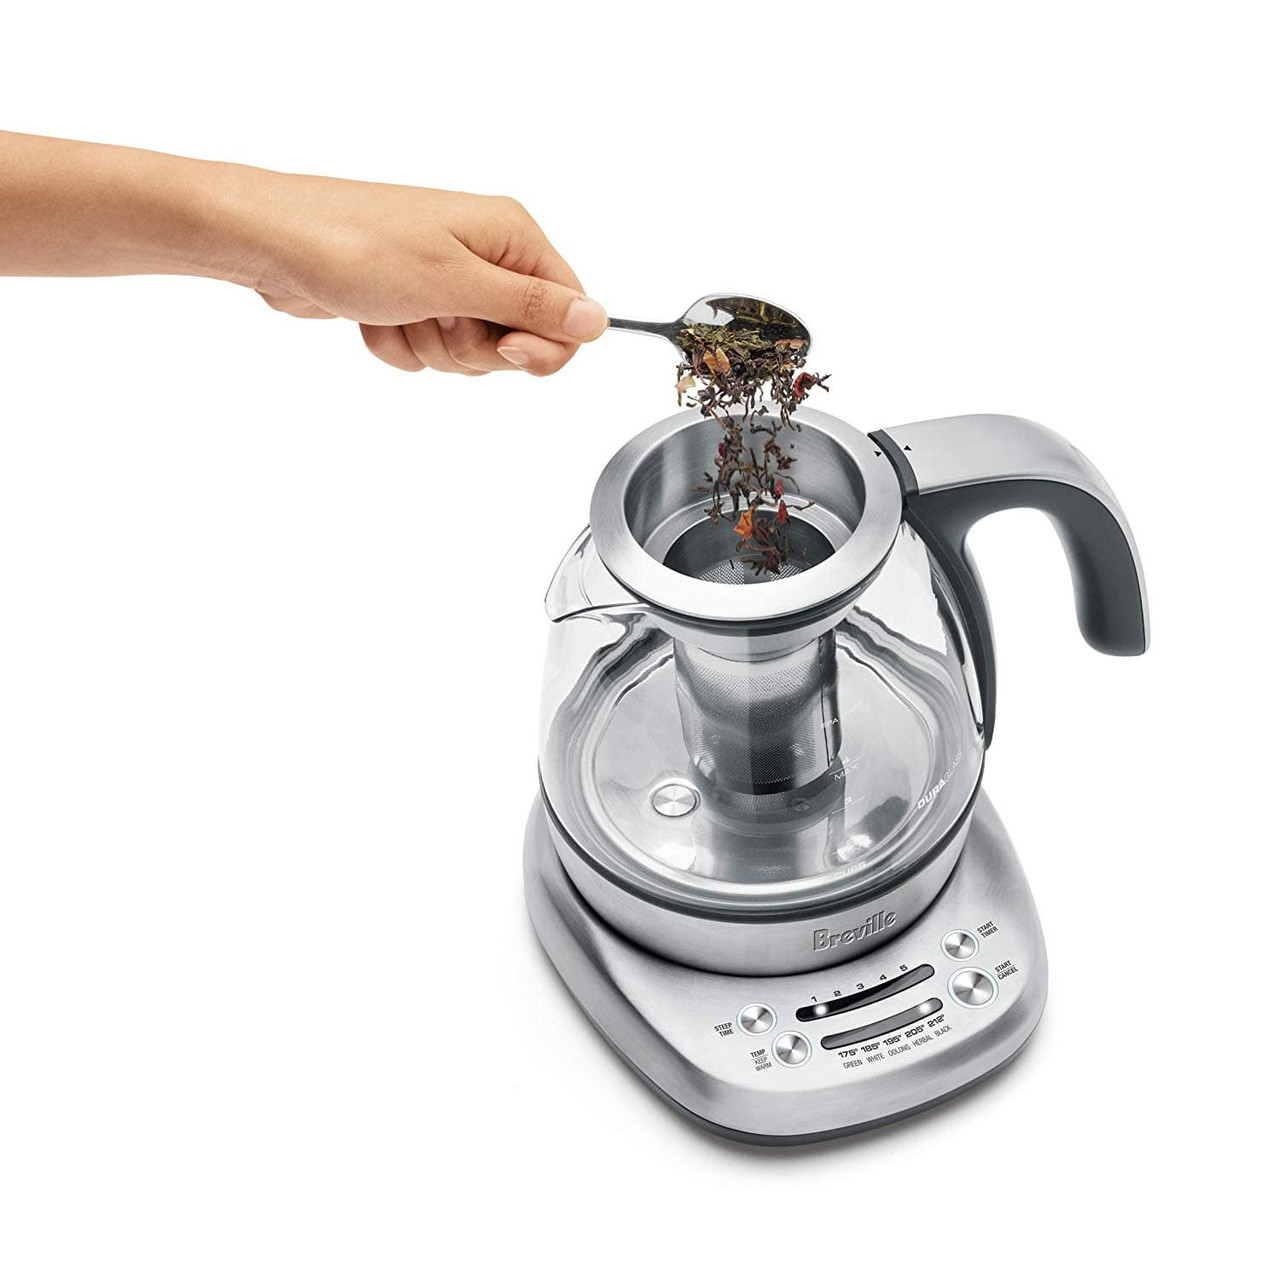 https://cdn11.bigcommerce.com/s-hccytny0od/images/stencil/1280x1280/products/2485/8563/breville-smart-tea-infuser-compact-1__38731.1557442445.jpg?c=2?imbypass=on